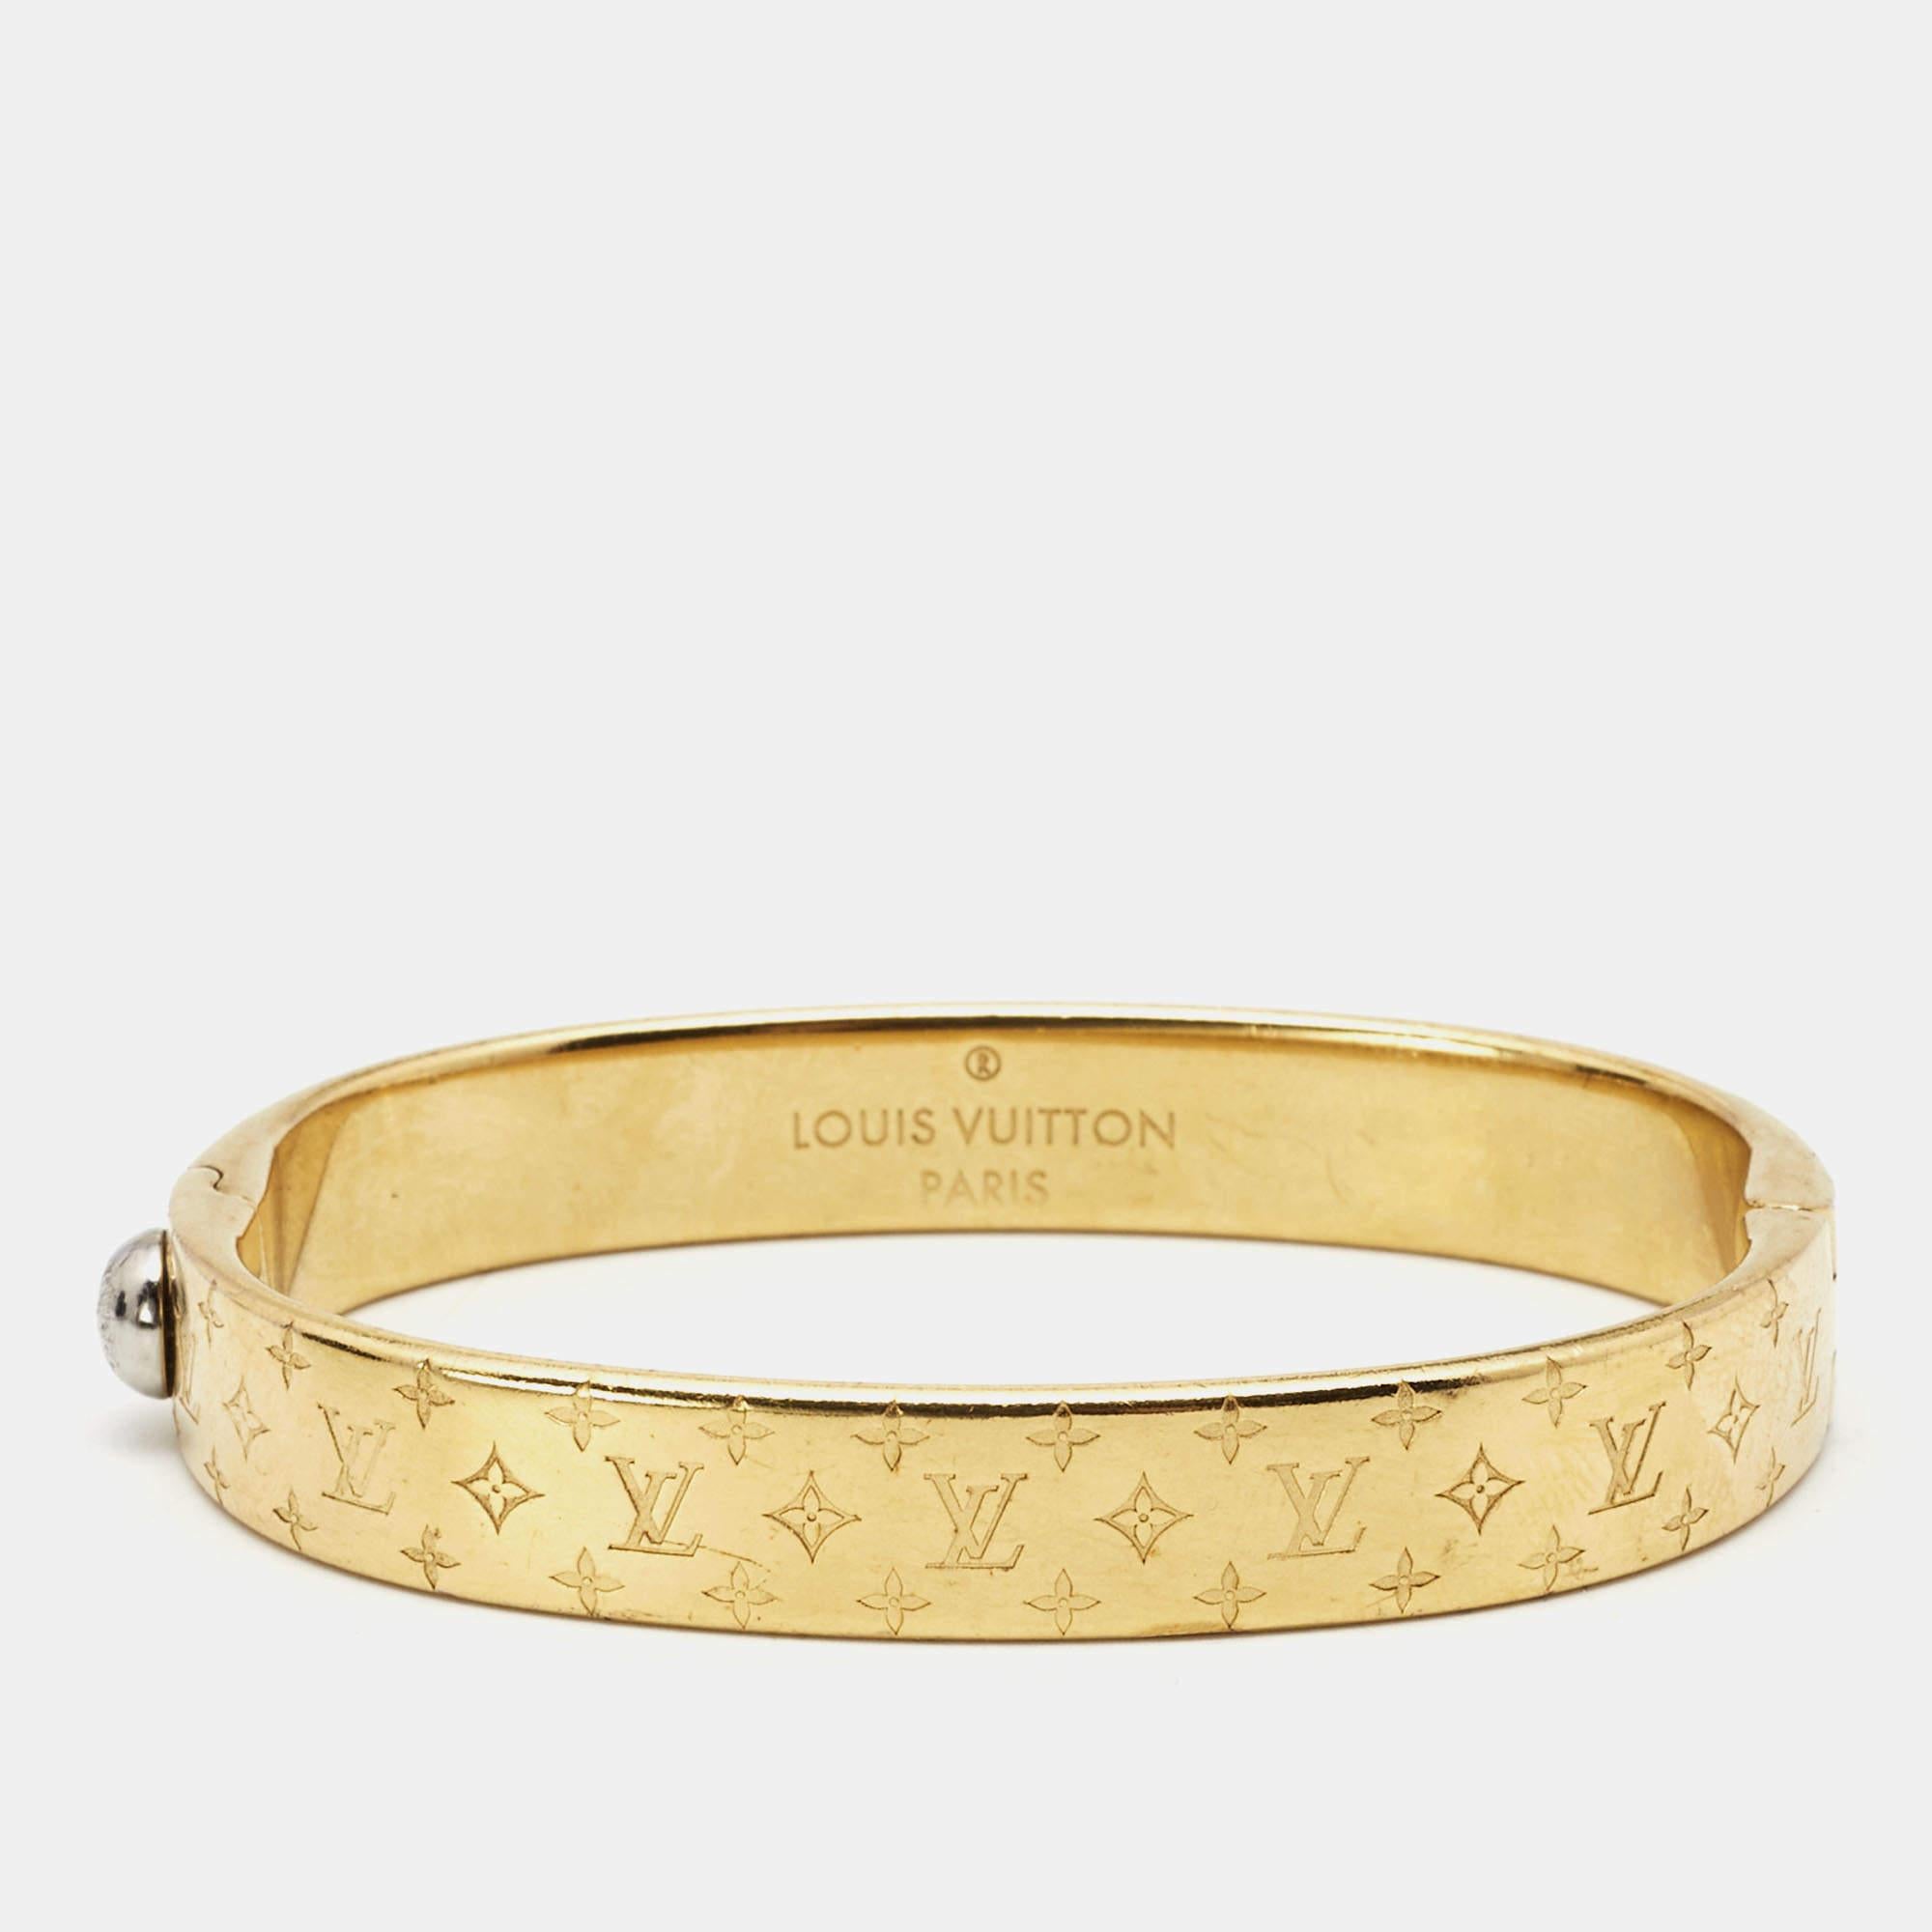 Bound to sit around your wrist and exude beauty, this Louis Vuitton is a great buy. It is made from metal and engraved with the brand's signature monogram — a pattern well-known and loved by fashion lovers around the world. The bracelet has a smooth